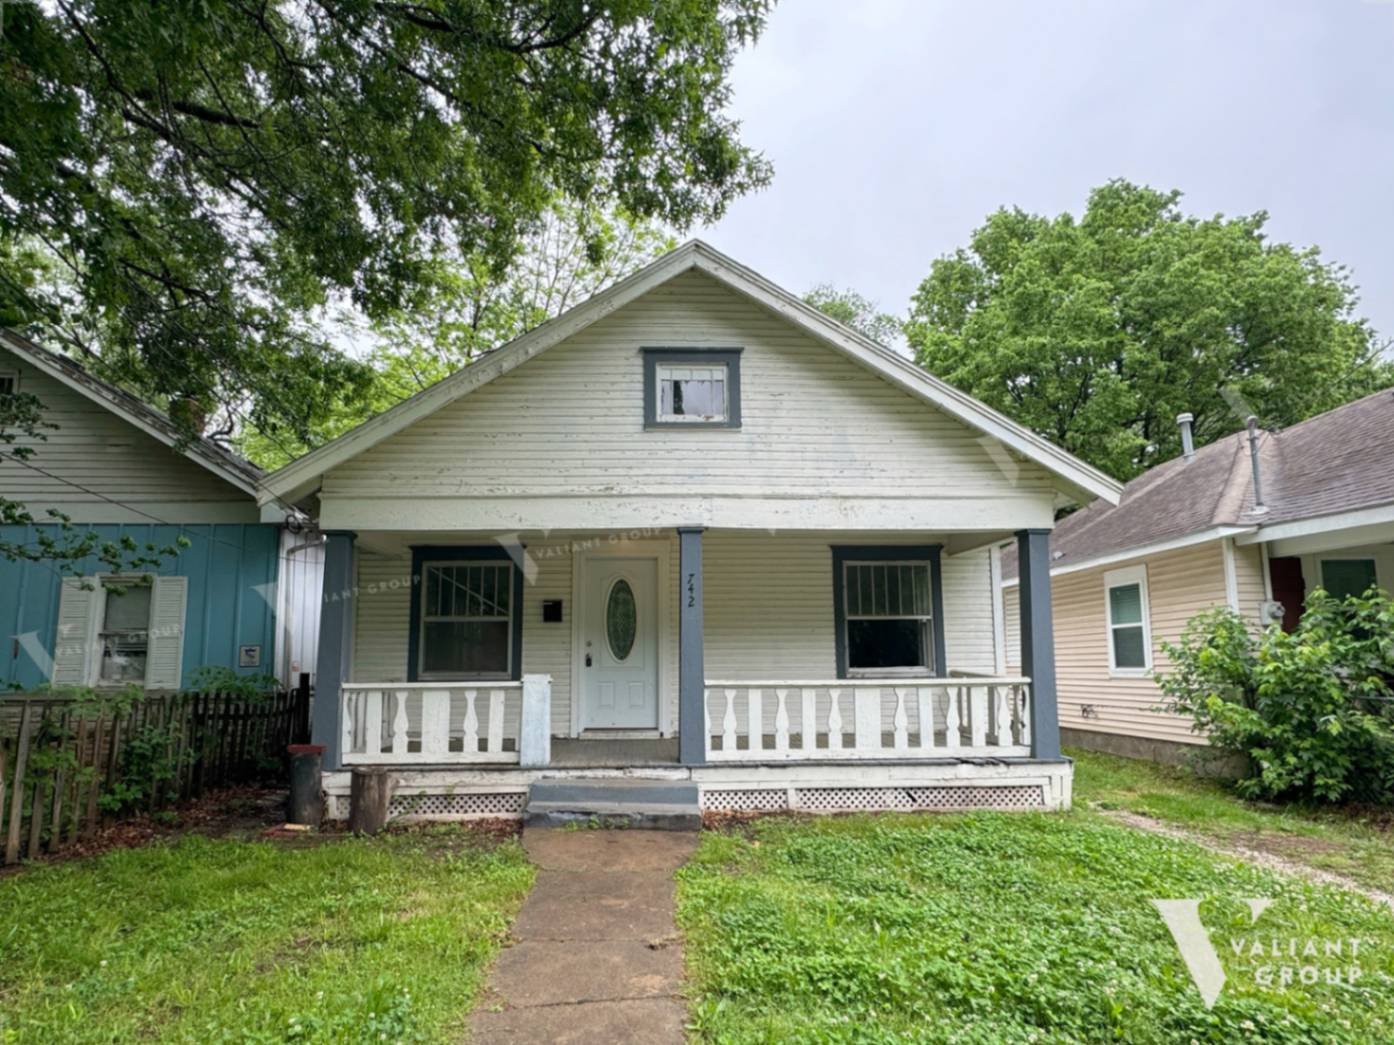 House-For-Rent-742-S-Douglas-Ave-Springfield-MO--01-Front-Porch.jpg